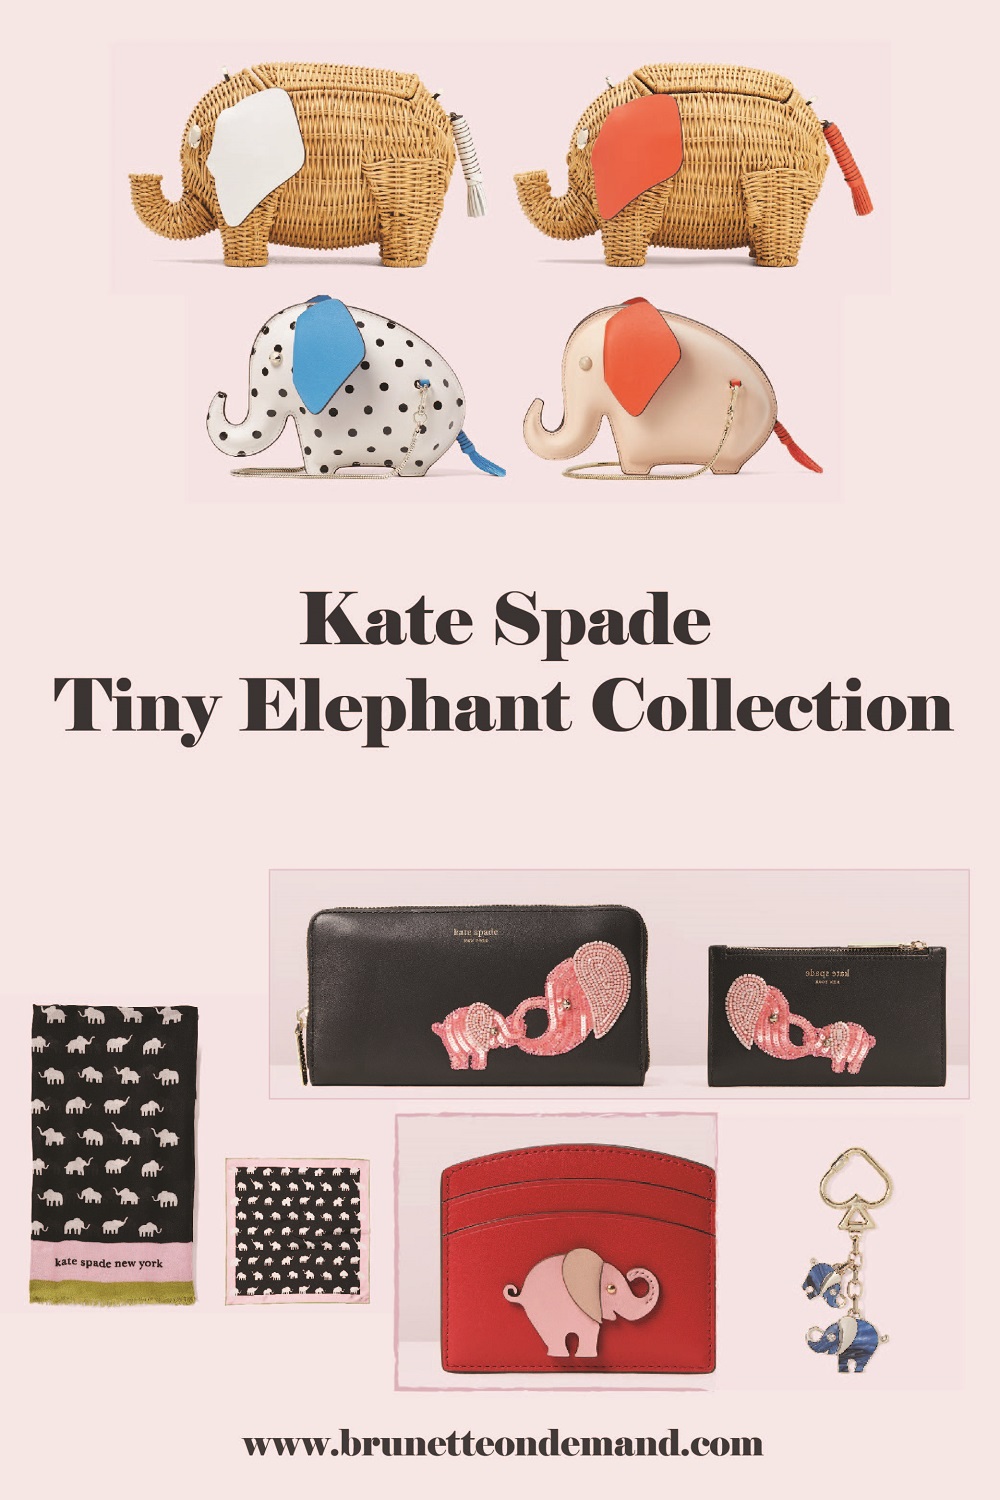 Kate Spade Designer Inspired Elephant Bags and Accessories Collection